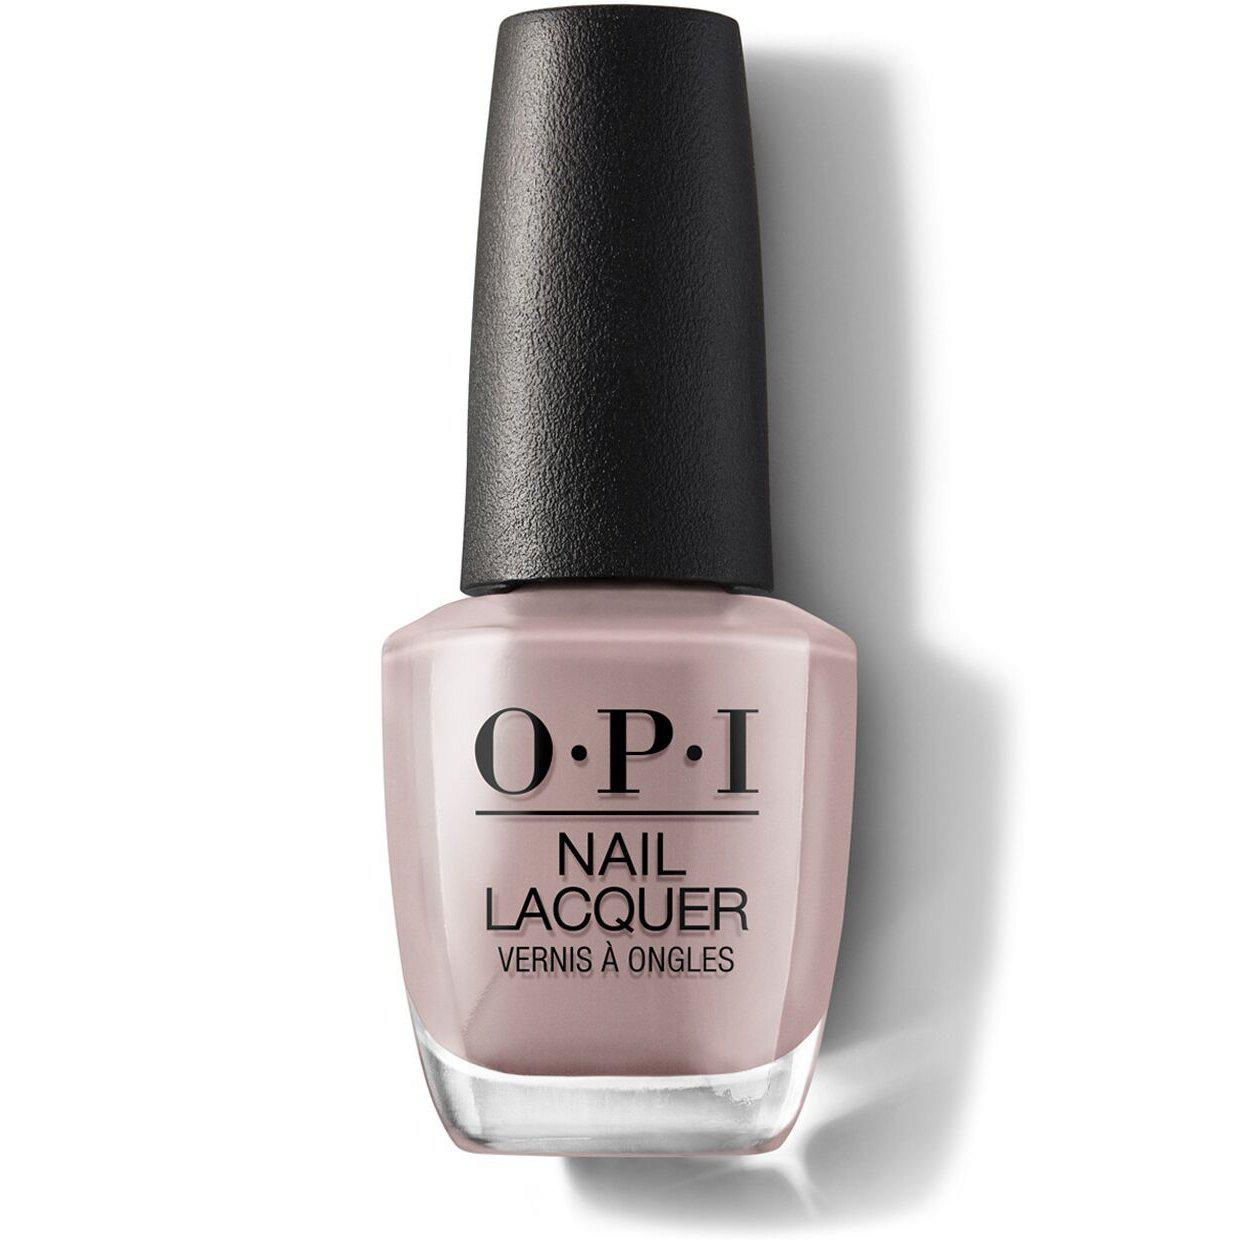 OPI nail lacquer Berlin there done That